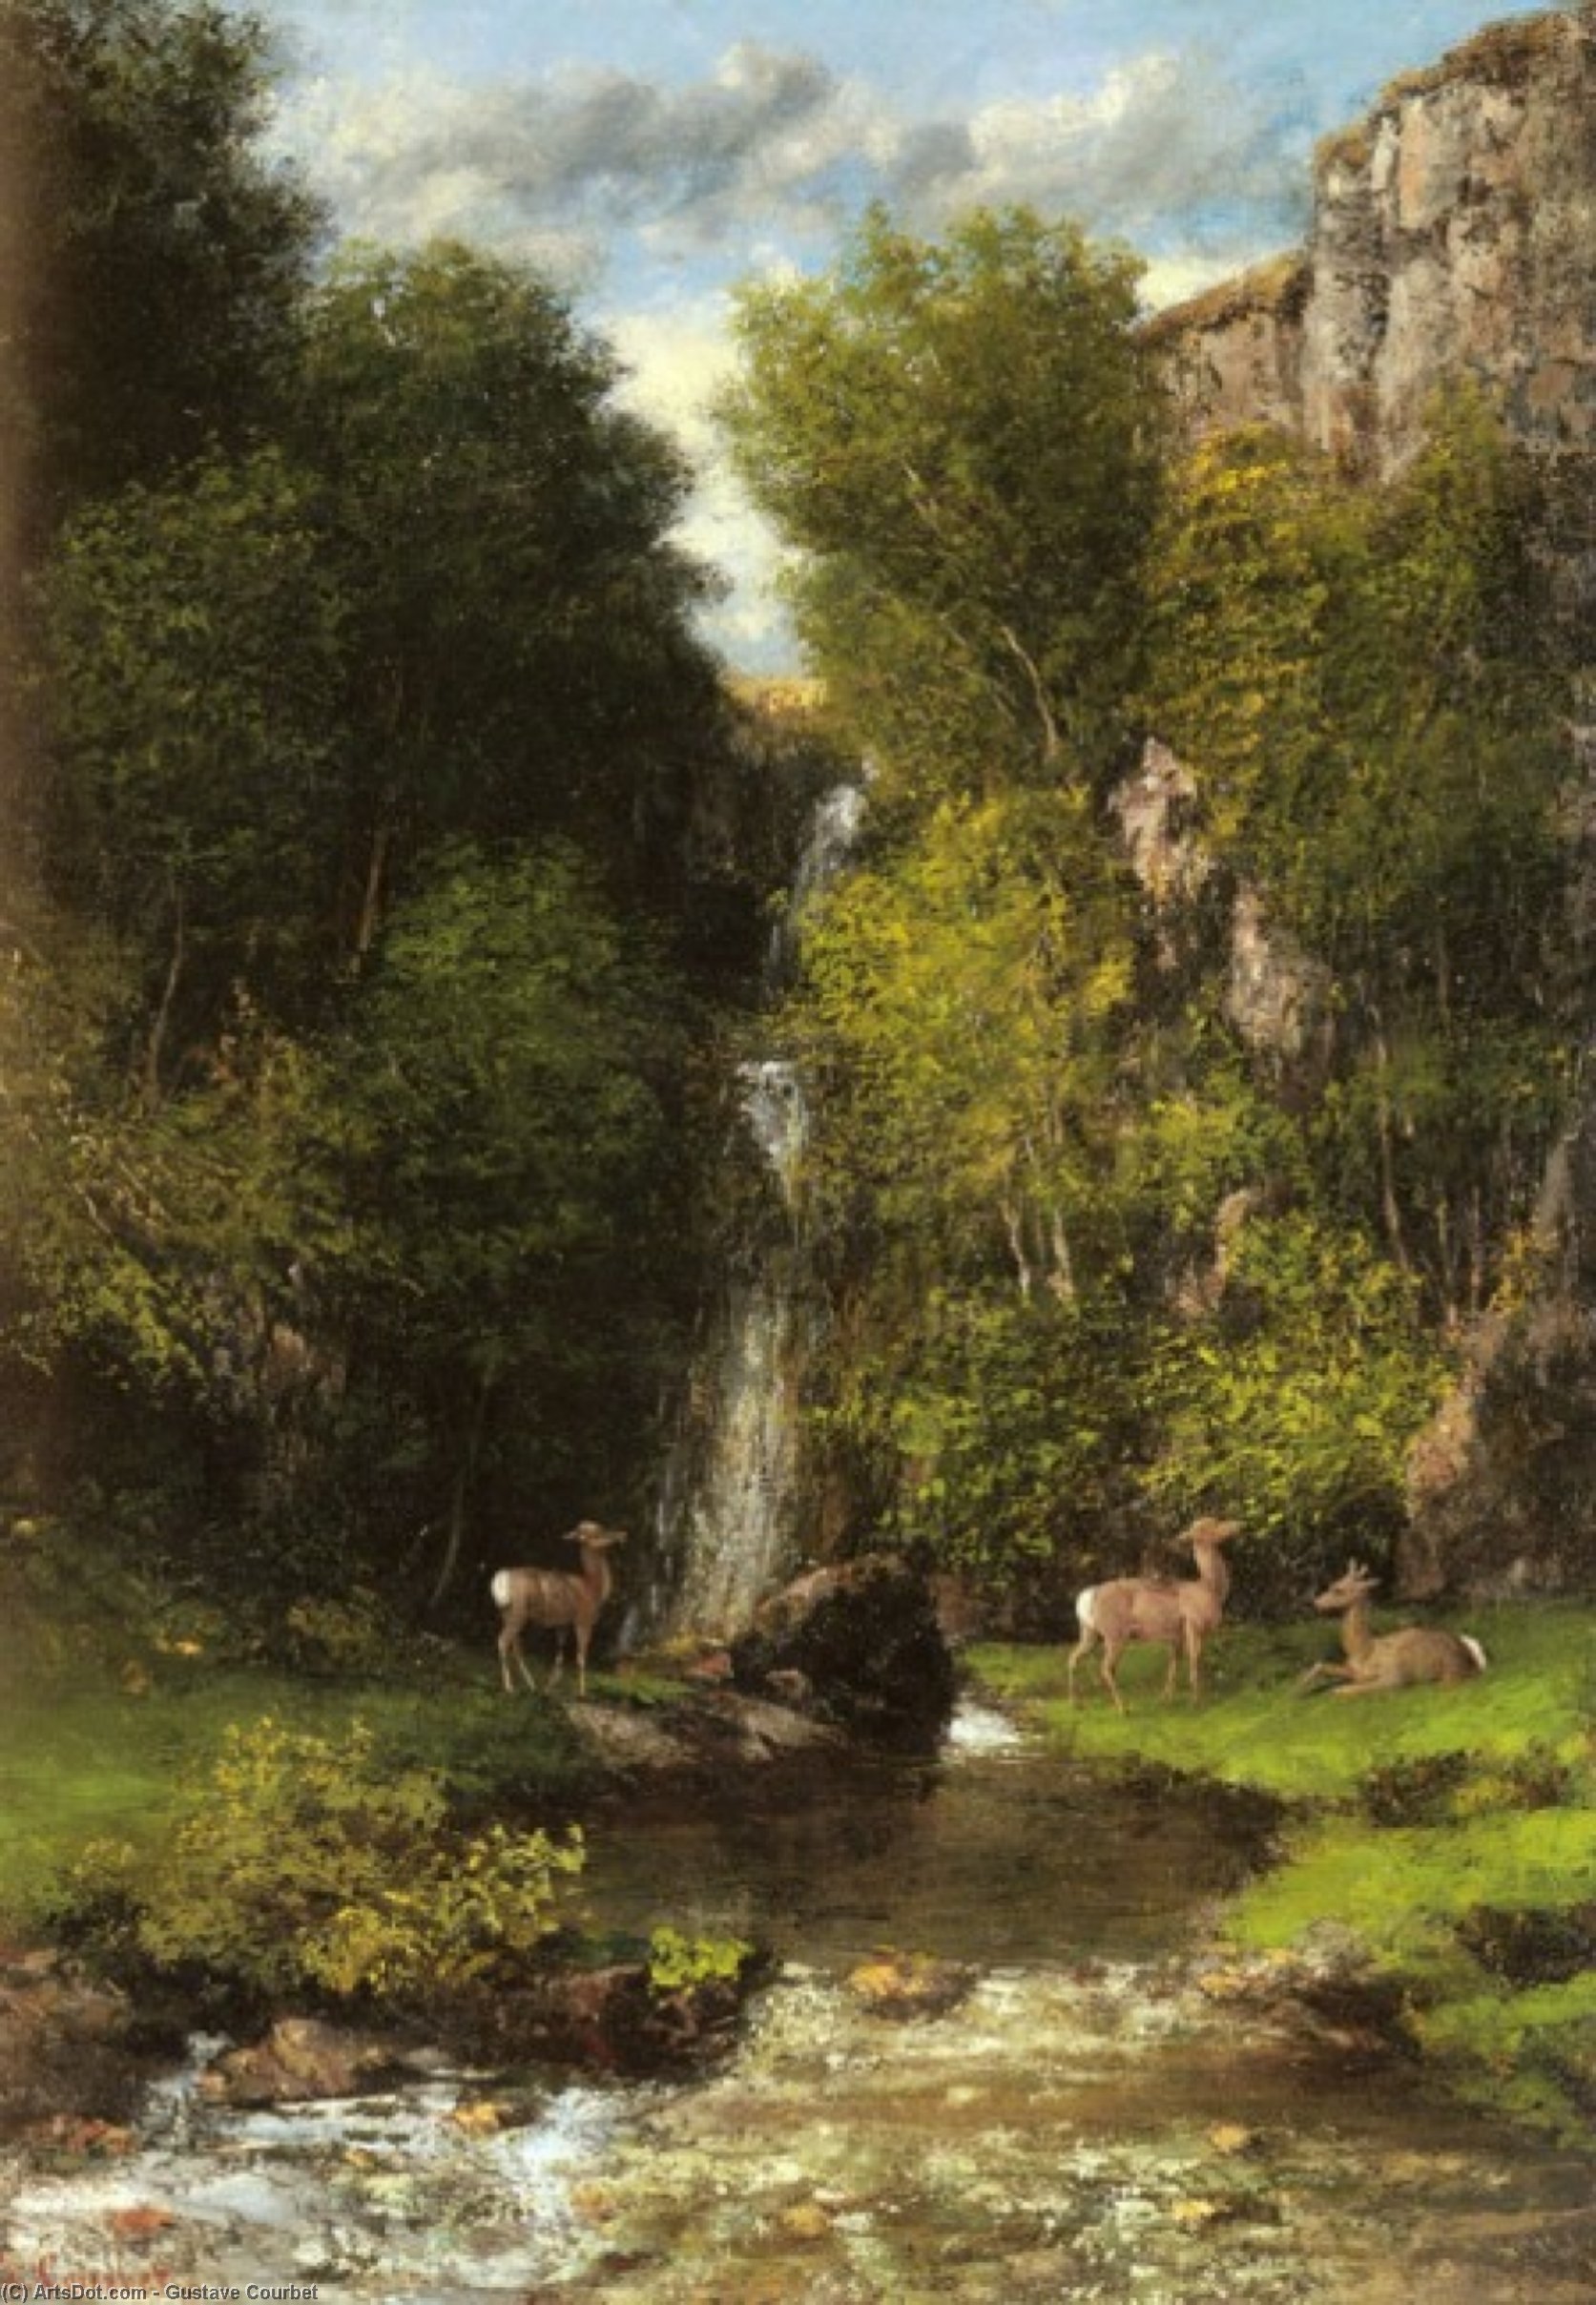 WikiOO.org - Encyclopedia of Fine Arts - Festés, Grafika Gustave Courbet - A Family of Deer in a Landscape with a Waterfall